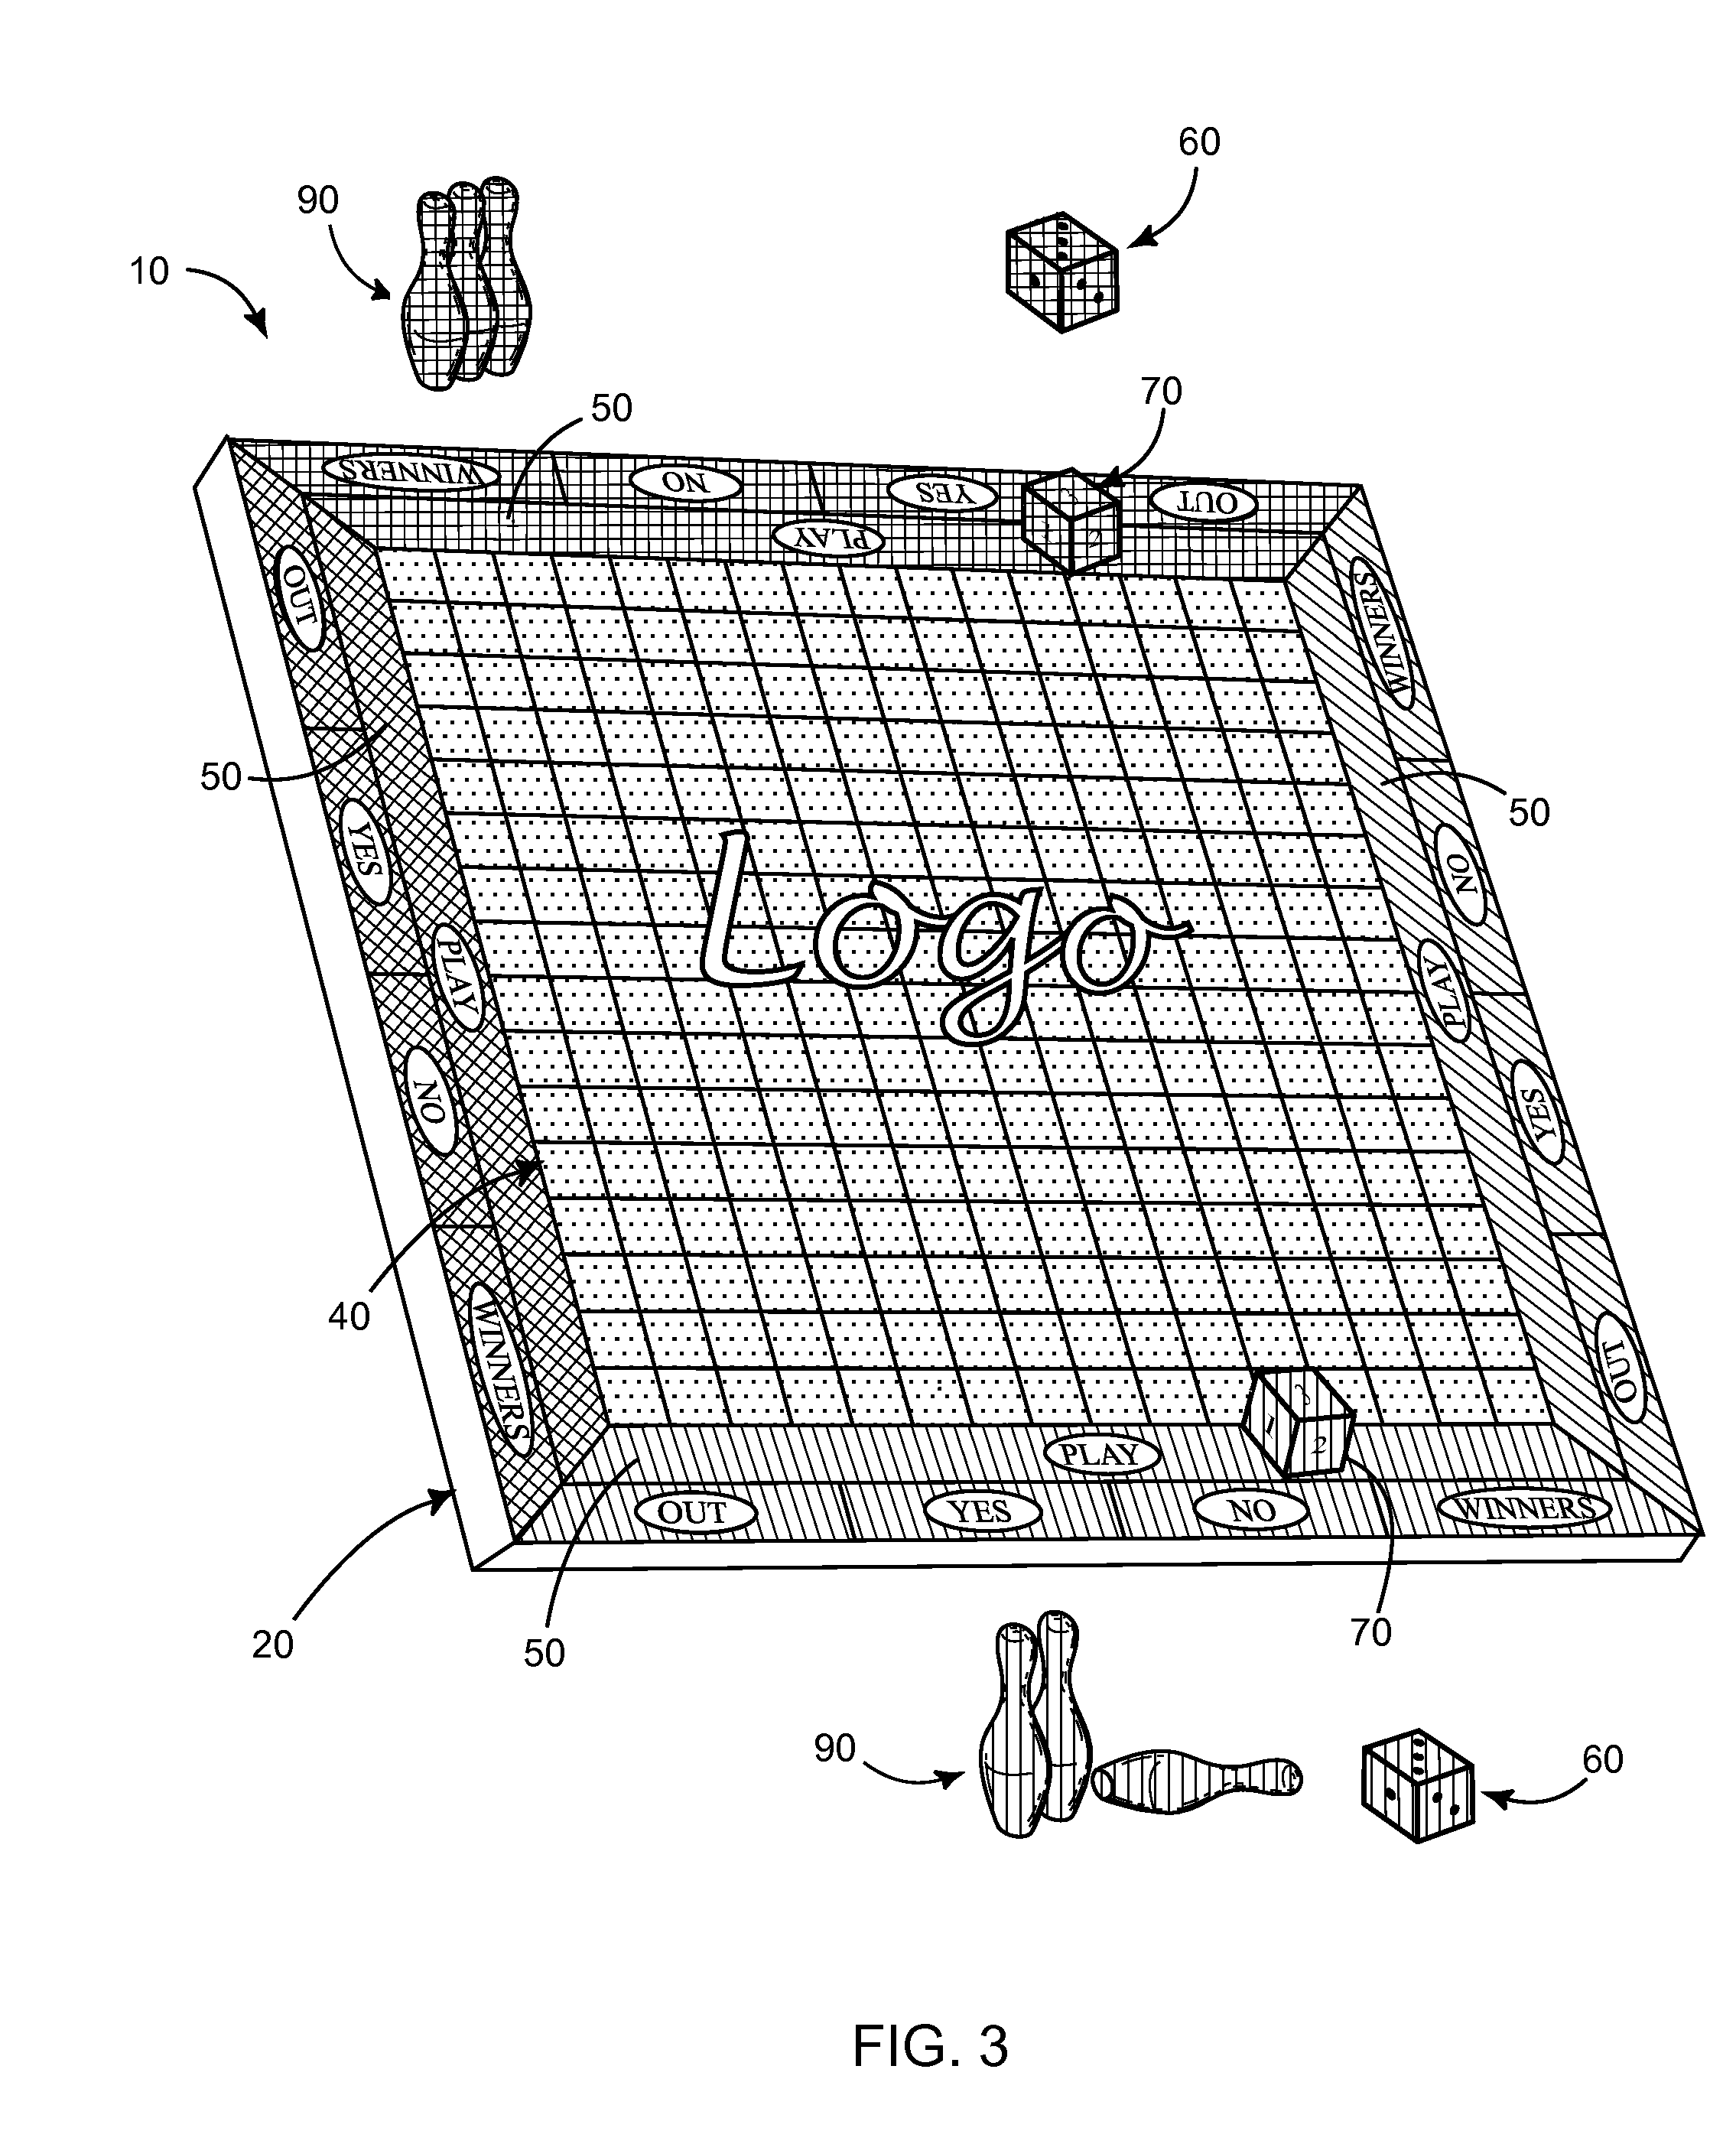 Board Game and Method of Play